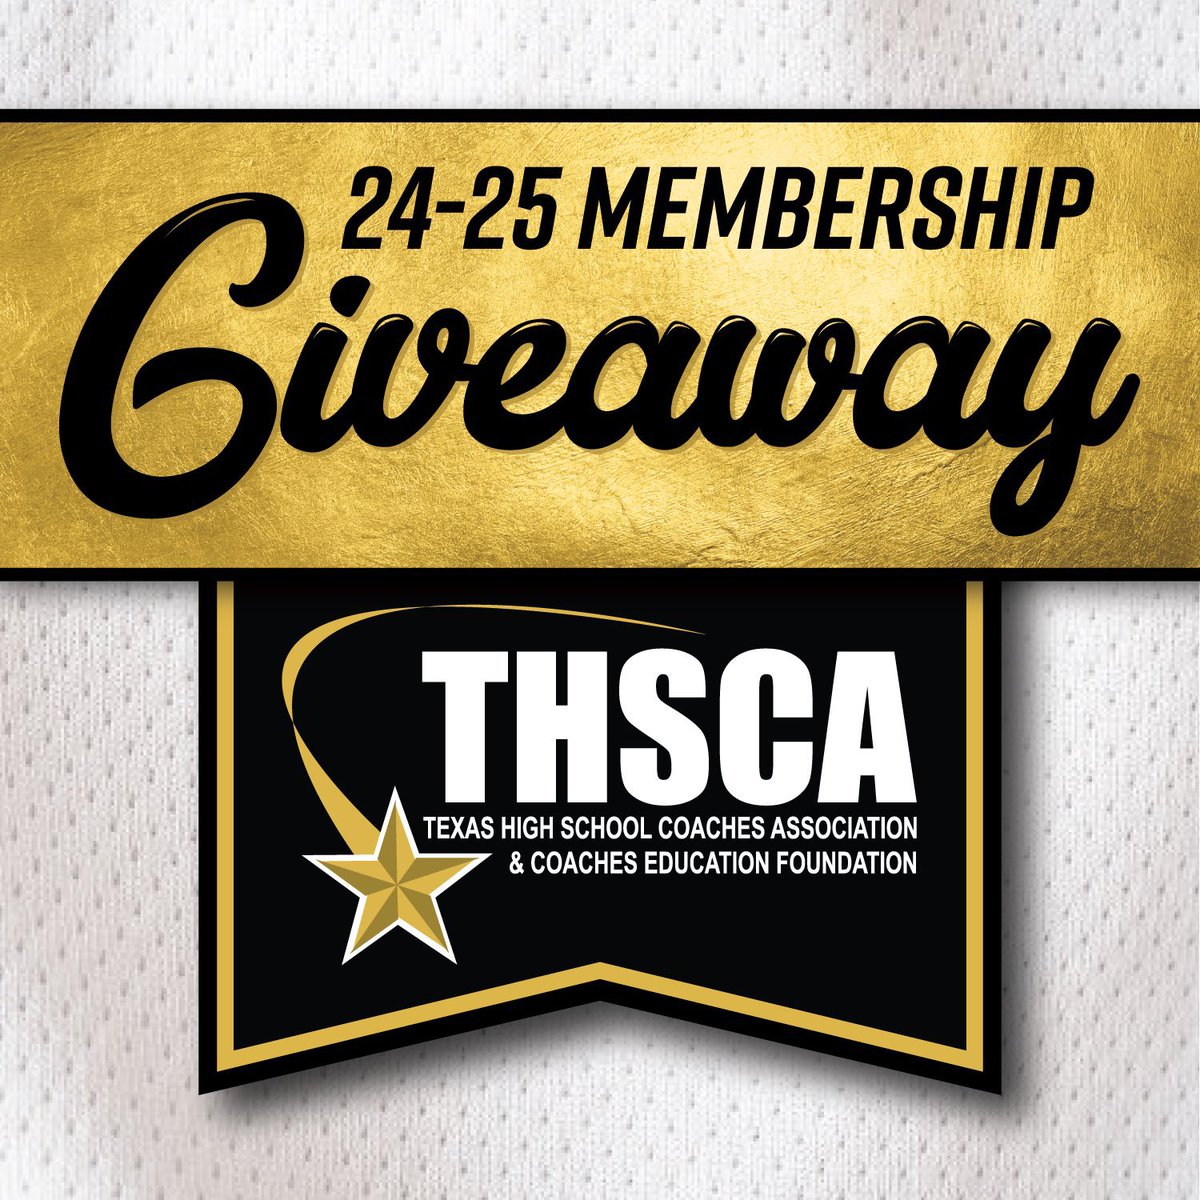 I have a few more memberships to give away!!!! If you’re a coach who’s new to the profession, been coach 5 years or less, or never had a THSCA membership please DM me!! Best chance to grow, network, learn from other successful TXHS coaches! #brandambassador